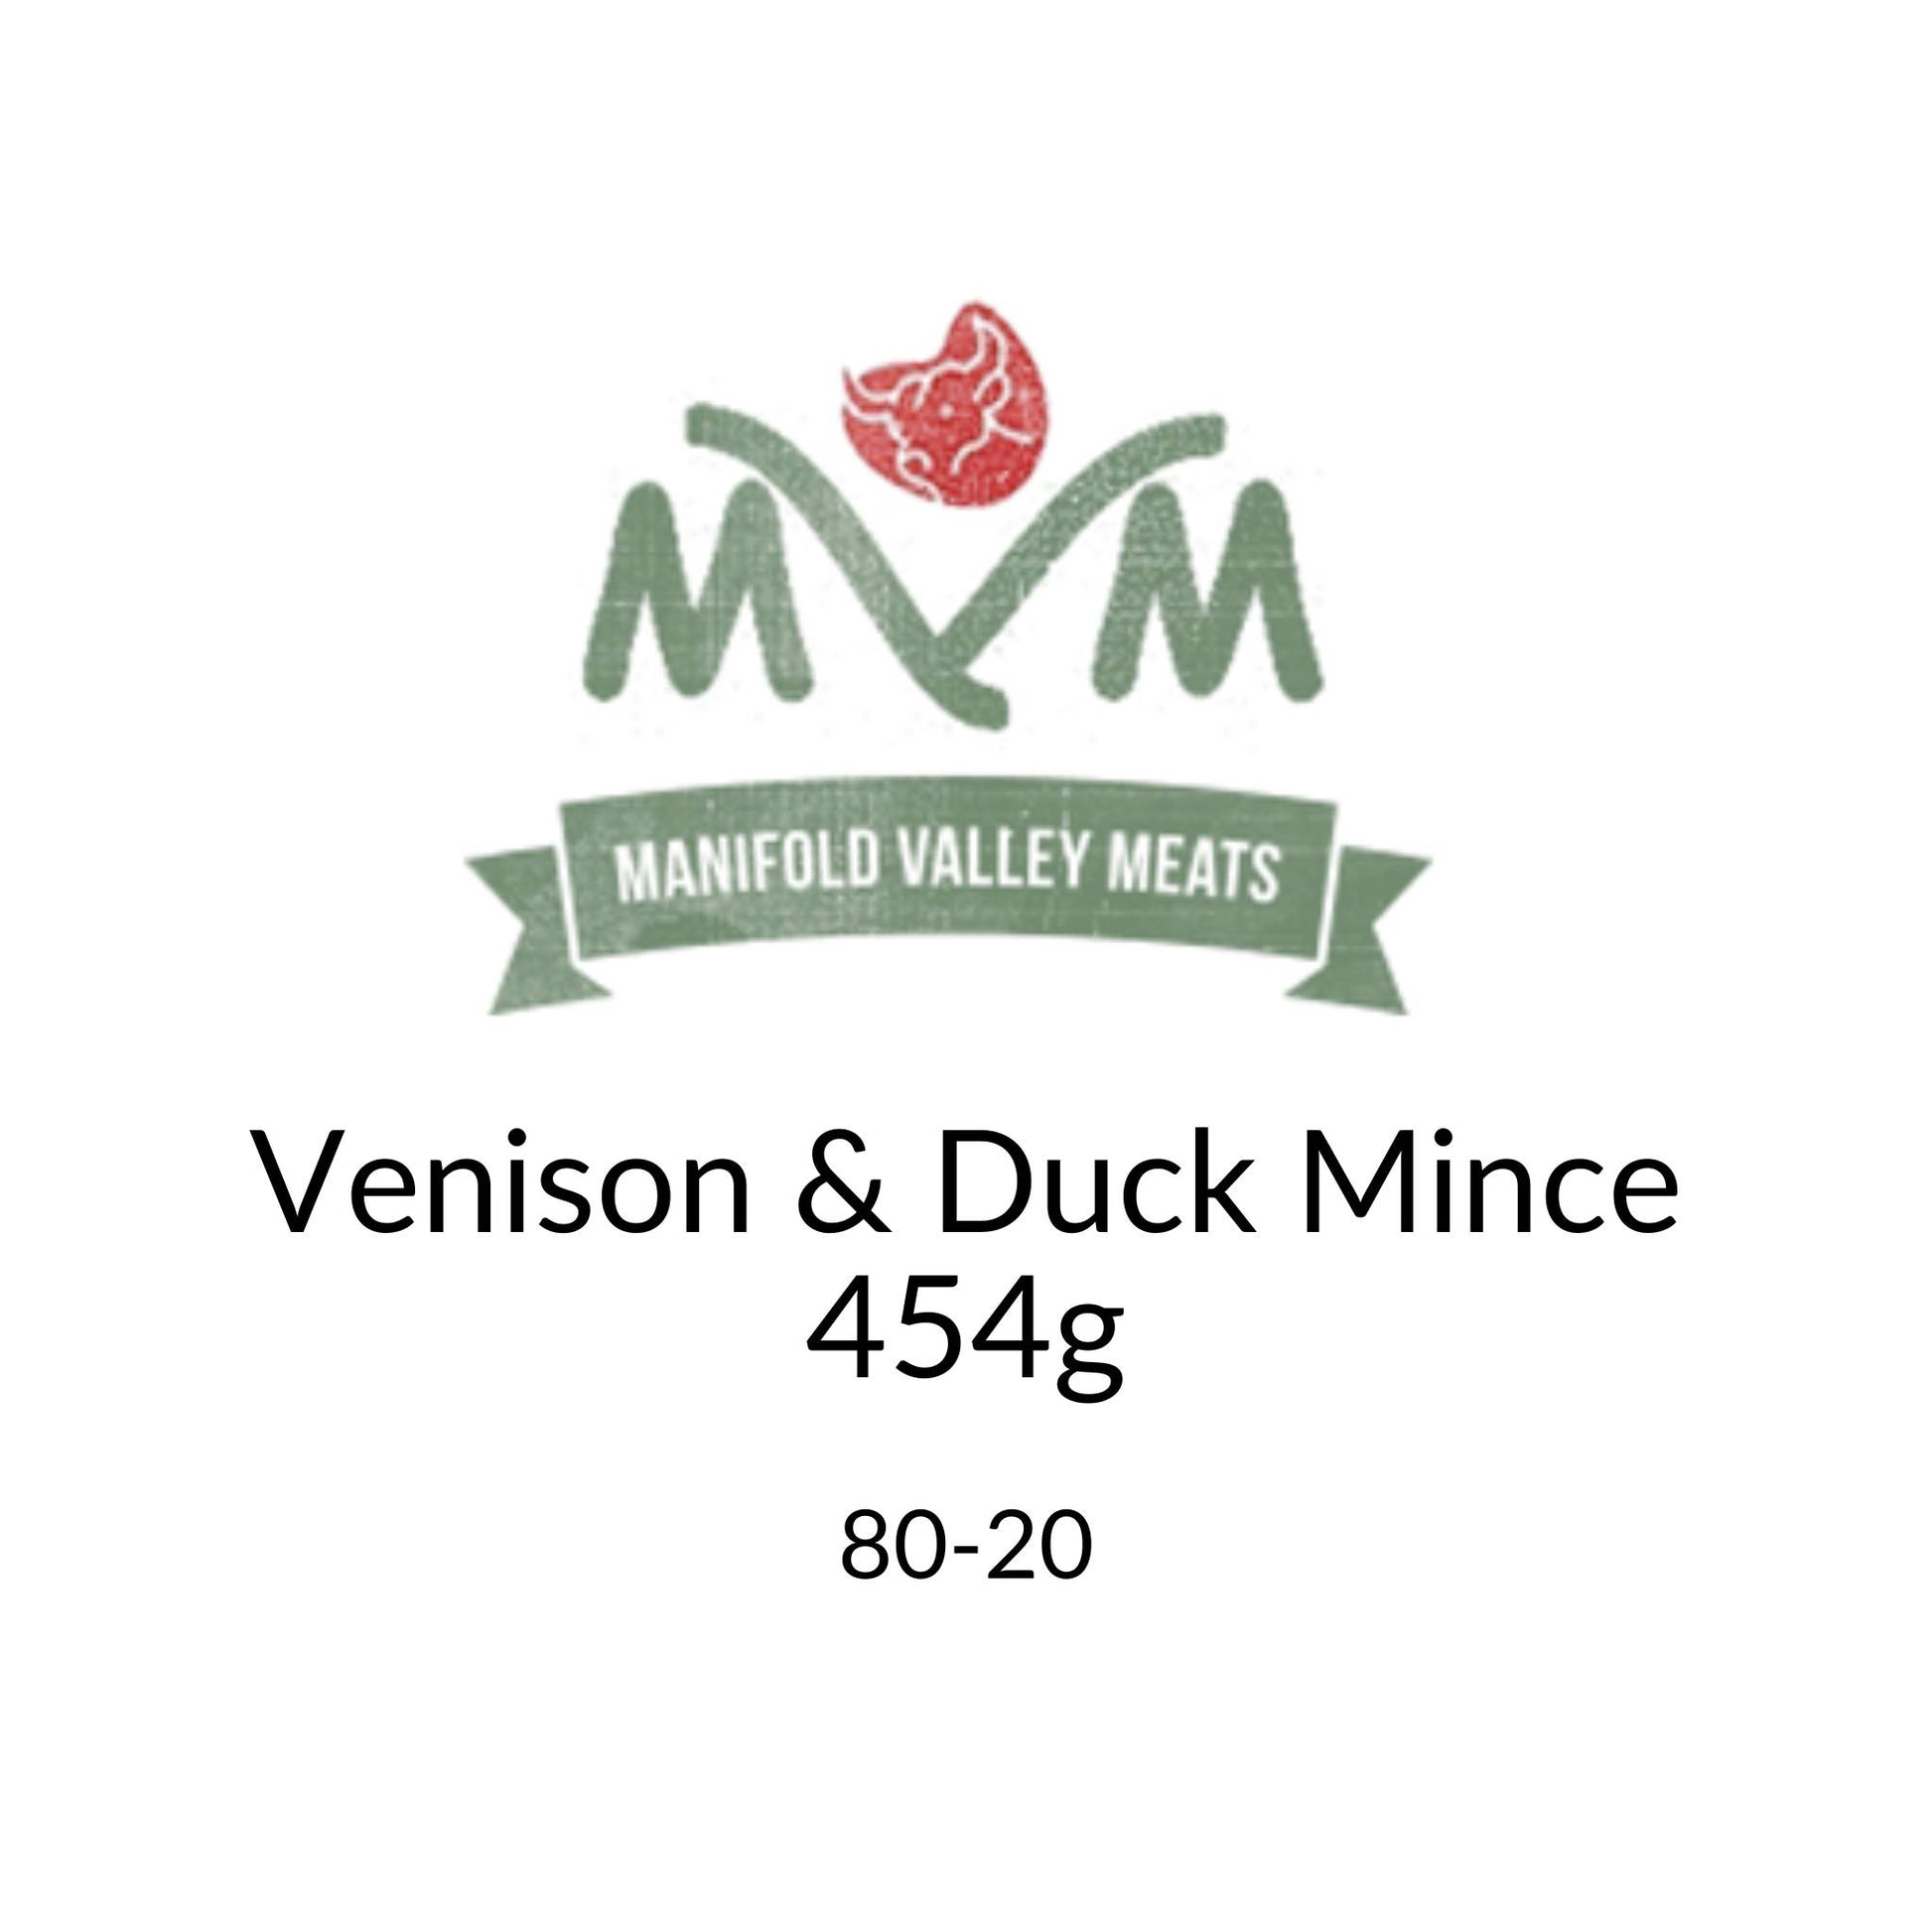 Manifold Valley Meats Venison and Duck Mince Raw Dog Food